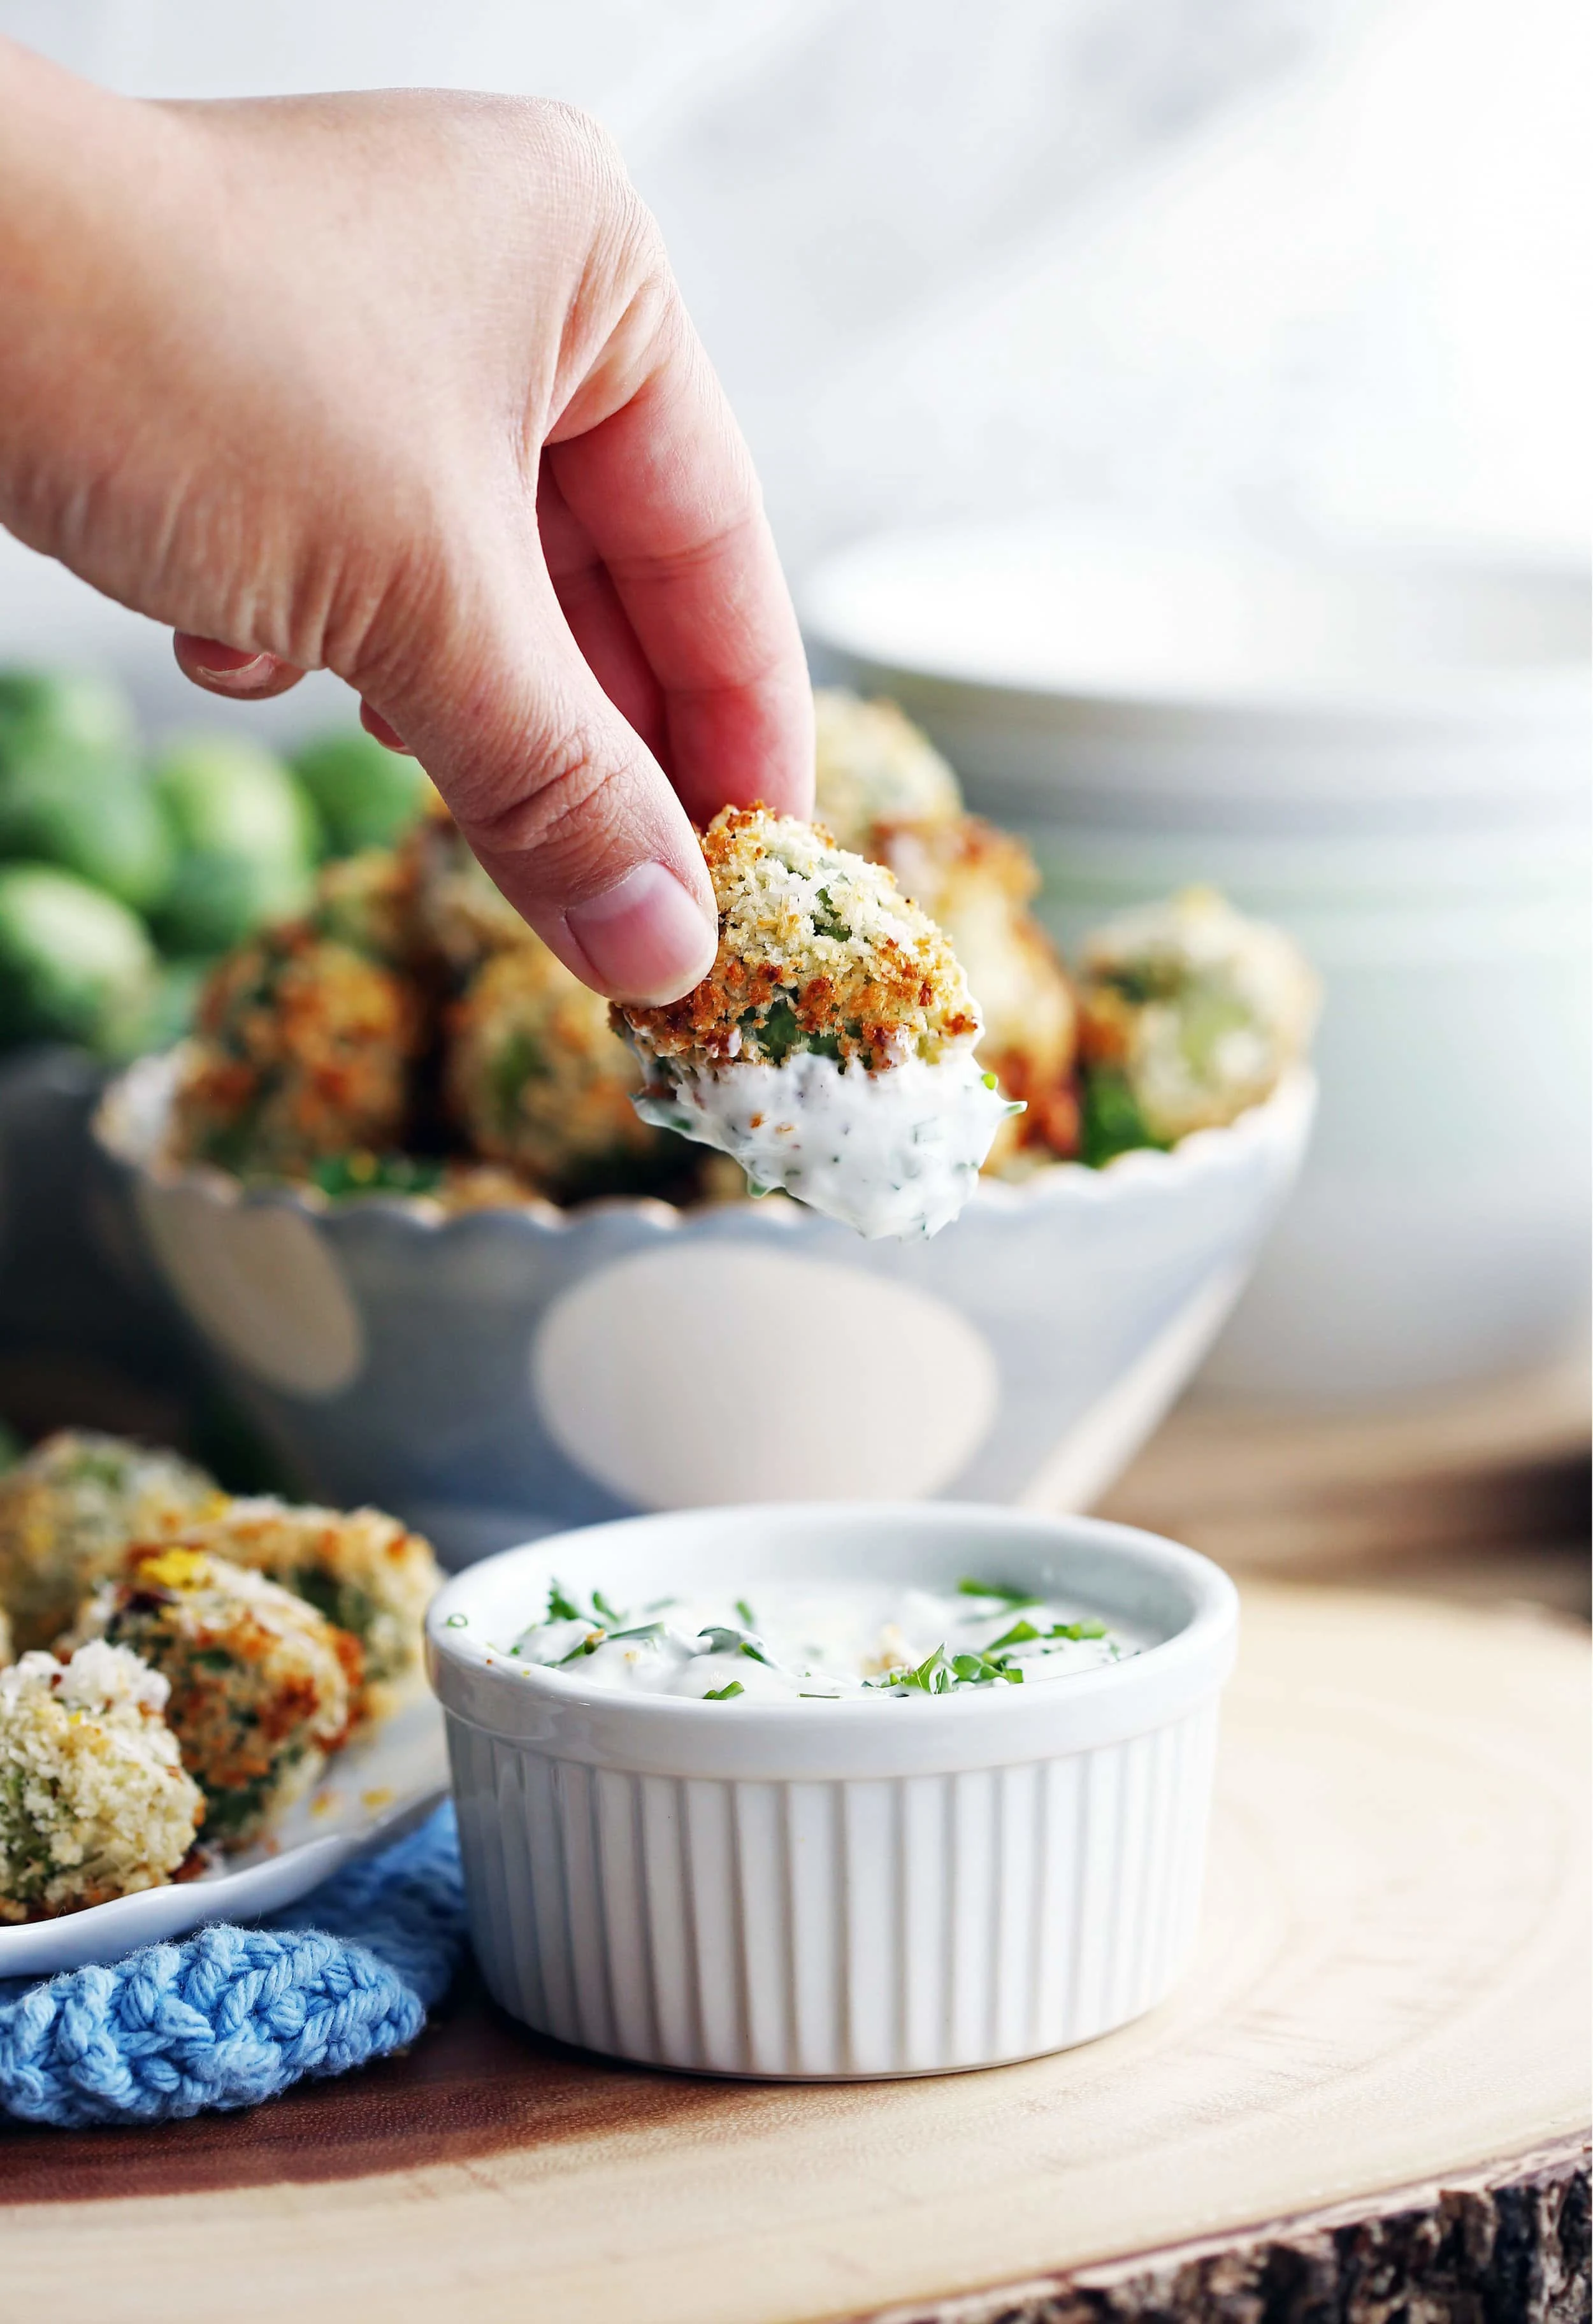 Fingers holding a single parmesan Panko Brussels sprout that has been dipped in sour cream sauce.